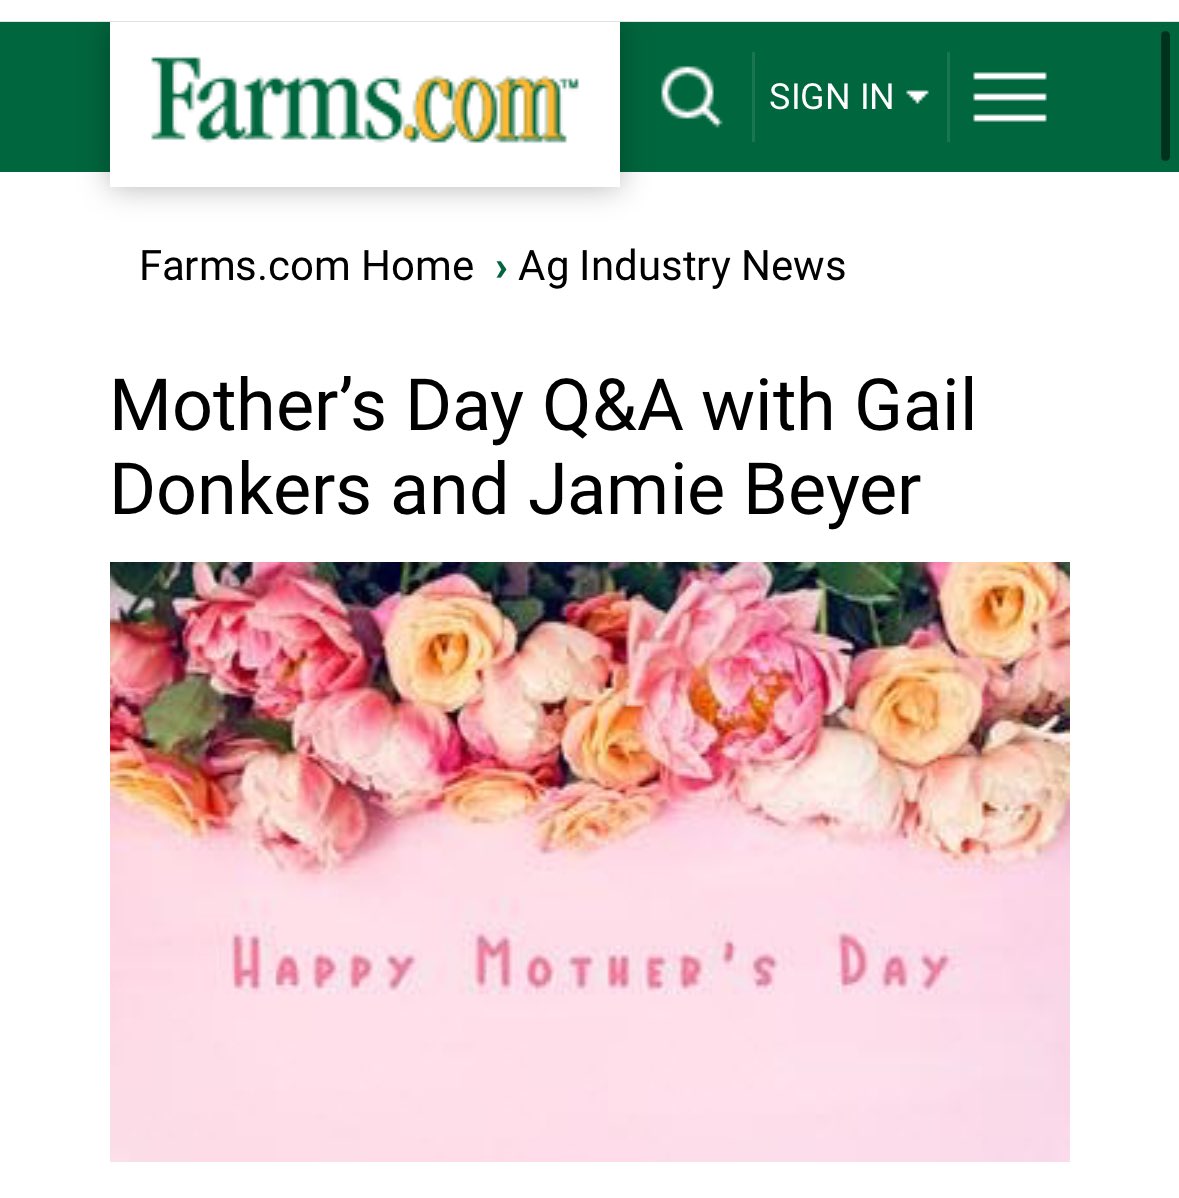 MFU Outreach Organizer Gail Donkers joined farms.com to share memories about her mother and what lessons she’s passing down to her own children. Check it out: m.farms.com/ag-industry-ne…